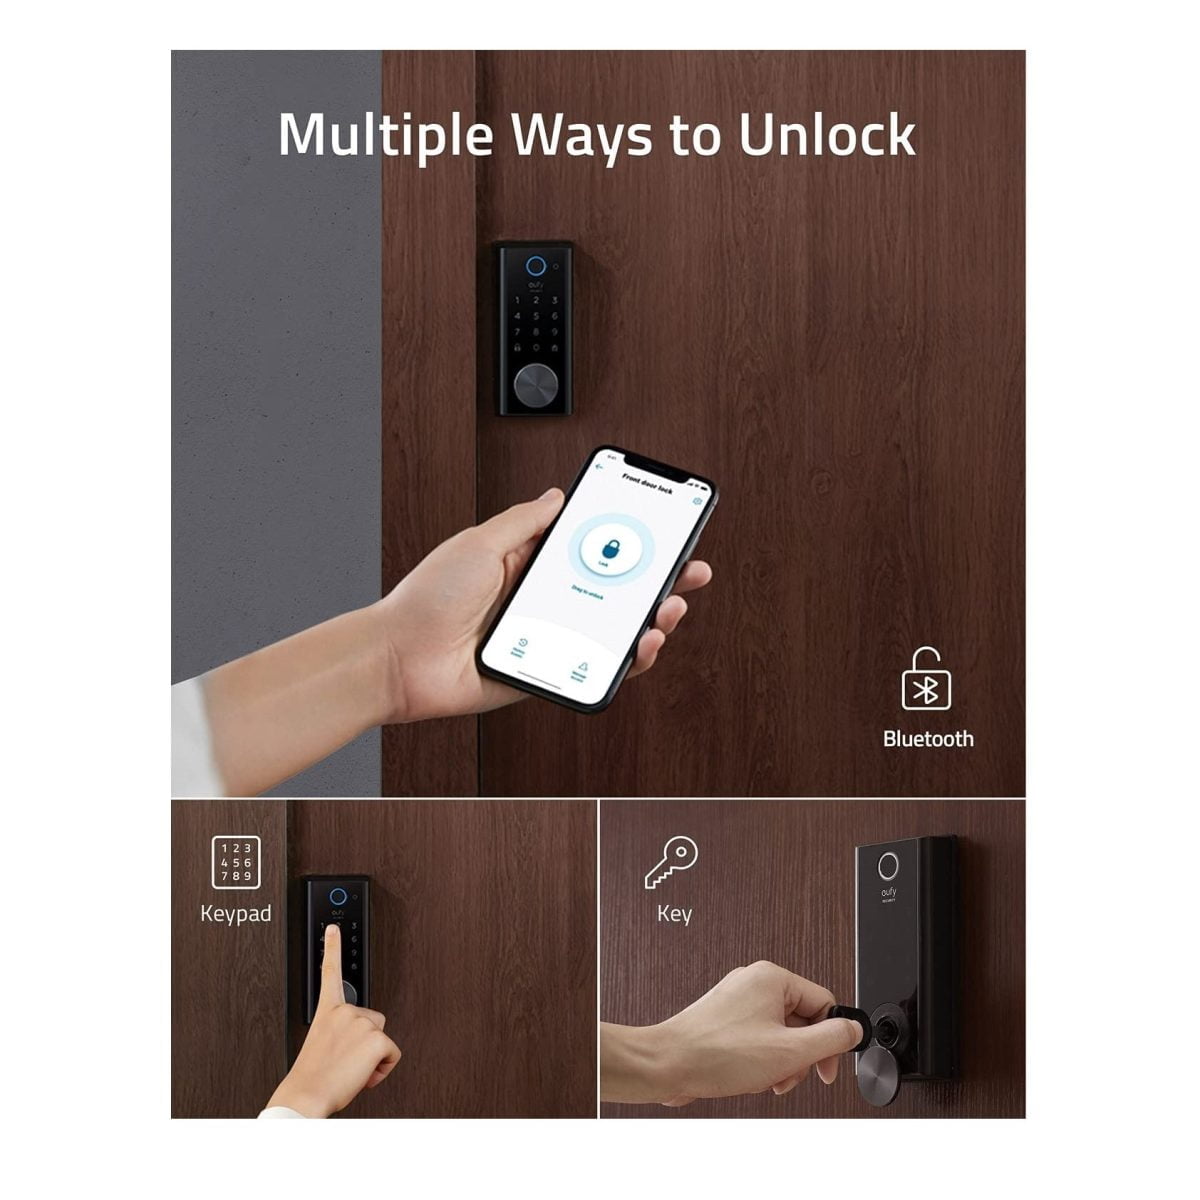 71Alwoajpsl. Ac Sl1500 Eufy &Lt;H1 Class=&Quot;Product-Meta__Title Heading H1&Quot;&Gt;Eufy Security Smart Lock Touch And Wi-Fi&Lt;/H1&Gt; Https://Www.youtube.com/Watch?V=A_Ctk37Uap0 &Lt;Ul&Gt; &Lt;Li Class=&Quot;&Quot; Data-List=&Quot;Bullet1&Quot; Data-Start=&Quot;1&Quot;&Gt;&Lt;Strong&Gt;Your Finger Is The Key:&Lt;/Strong&Gt; Smart Lock Recognizes Your Fingerprint In Just 0.3 Seconds And Unlocks Your Door In 1 Second—It’s Faster Than Fumbling For Your Keys.&Lt;/Li&Gt; &Lt;/Ul&Gt; &Lt;Ul&Gt; &Lt;Li Class=&Quot;&Quot; Data-List=&Quot;Bullet1&Quot; Data-Start=&Quot;1&Quot;&Gt;&Lt;Strong&Gt;Control From Anywhere:&Lt;/Strong&Gt; With Its All-New Wi-Fi Connectivity, You Can Control Smart Lock From Absolutely Anywhere Via The Eufy Security App.&Lt;/Li&Gt; &Lt;/Ul&Gt; &Lt;Ul&Gt; &Lt;Li Class=&Quot;&Quot; Data-List=&Quot;Bullet1&Quot; Data-Start=&Quot;1&Quot;&Gt;&Lt;Strong&Gt;Always Has Your Back:&Lt;/Strong&Gt; Even When You’re In A Hurry, Smart Lock Is Ready To Protect Your Home. A Built-In Sensor Detects When Your Door Is Closed And Locks It Automatically Behind You, Every Time.&Lt;/Li&Gt; &Lt;/Ul&Gt; &Lt;Ul&Gt; &Lt;Li Class=&Quot;&Quot; Data-List=&Quot;Bullet1&Quot; Data-Start=&Quot;1&Quot;&Gt;&Lt;Strong&Gt;Multiple Ways To Unlock:&Lt;/Strong&Gt; Open Smart Lock Using Your Fingerprint, With Your Phone Via The Eufy Security App, Or By Using The Keypad Or Key.&Lt;/Li&Gt; &Lt;/Ul&Gt; &Lt;Ul&Gt; &Lt;Li Class=&Quot;&Quot; Data-List=&Quot;Bullet1&Quot; Data-Start=&Quot;1&Quot;&Gt;&Lt;Strong&Gt;Built To Last:&Lt;/Strong&Gt; With A Sturdy Zinc Alloy And Stainless Steel Frame, Smart Lock Is Tested To Handle The Comings And Goings Of A Busy Household For Over 30 Years. The Ip65 Rating Ensures That Come Rain Or Shine, Your Front Door Is Protected.&Lt;/Li&Gt; &Lt;/Ul&Gt; &Lt;H5&Gt;Warranty: Eufy Product Warranty&Lt;/H5&Gt; Smart Lock Eufy Security Smart Lock Touch And Wi-Fi T8520111